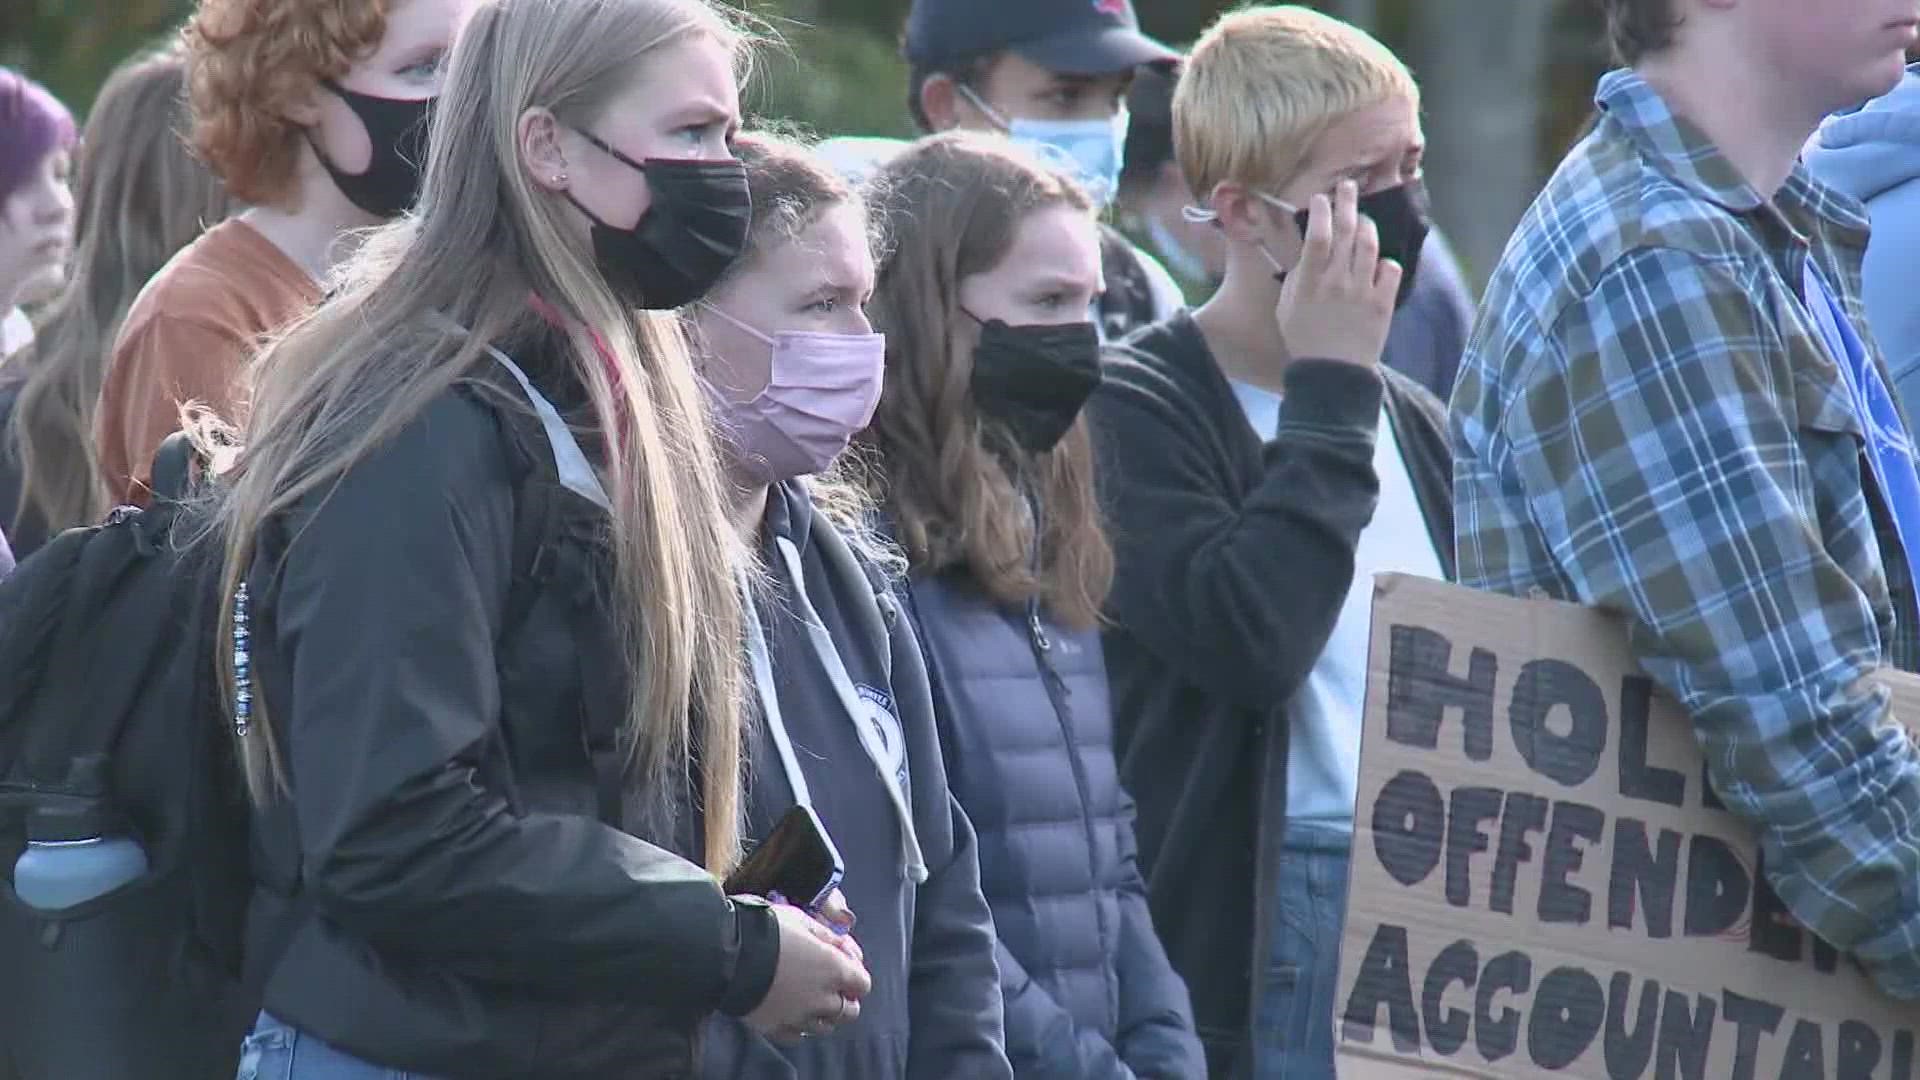 Students at Camden Hills Regional High School staged a walkout on Wednesday afternoon to protest how sexual assault is handled at their school